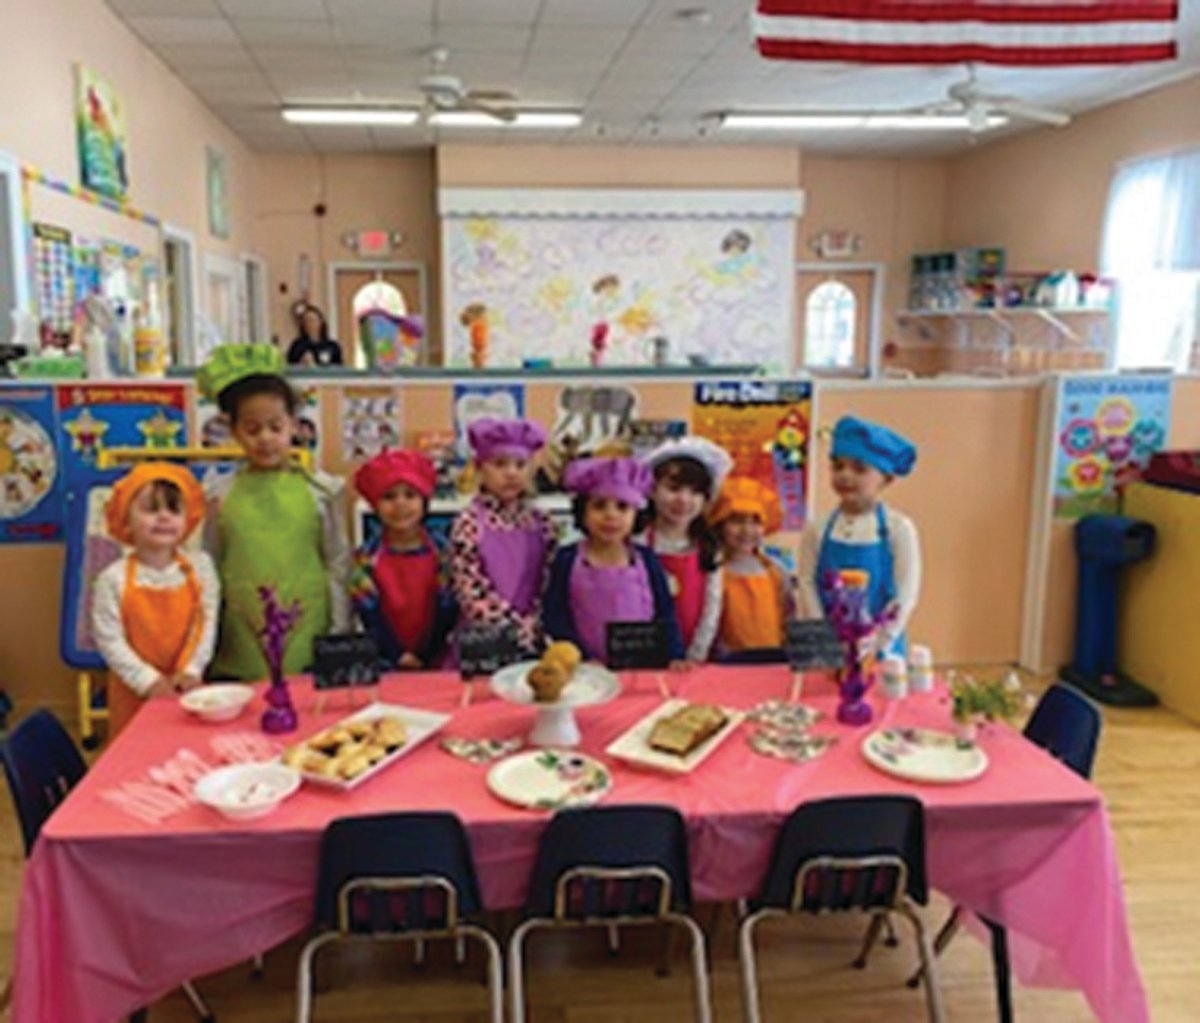 Pre-schoolers, from left to right, Matthew Bianca, Layla Sayeh, Olivia Deady, Alexis Driggers, Emalie Deady, Elise Ranaldi, Giovanna Calcagni and Antonio Bibby, were just some of the youngsters who enjoyed “Muffins with Mom” last week.